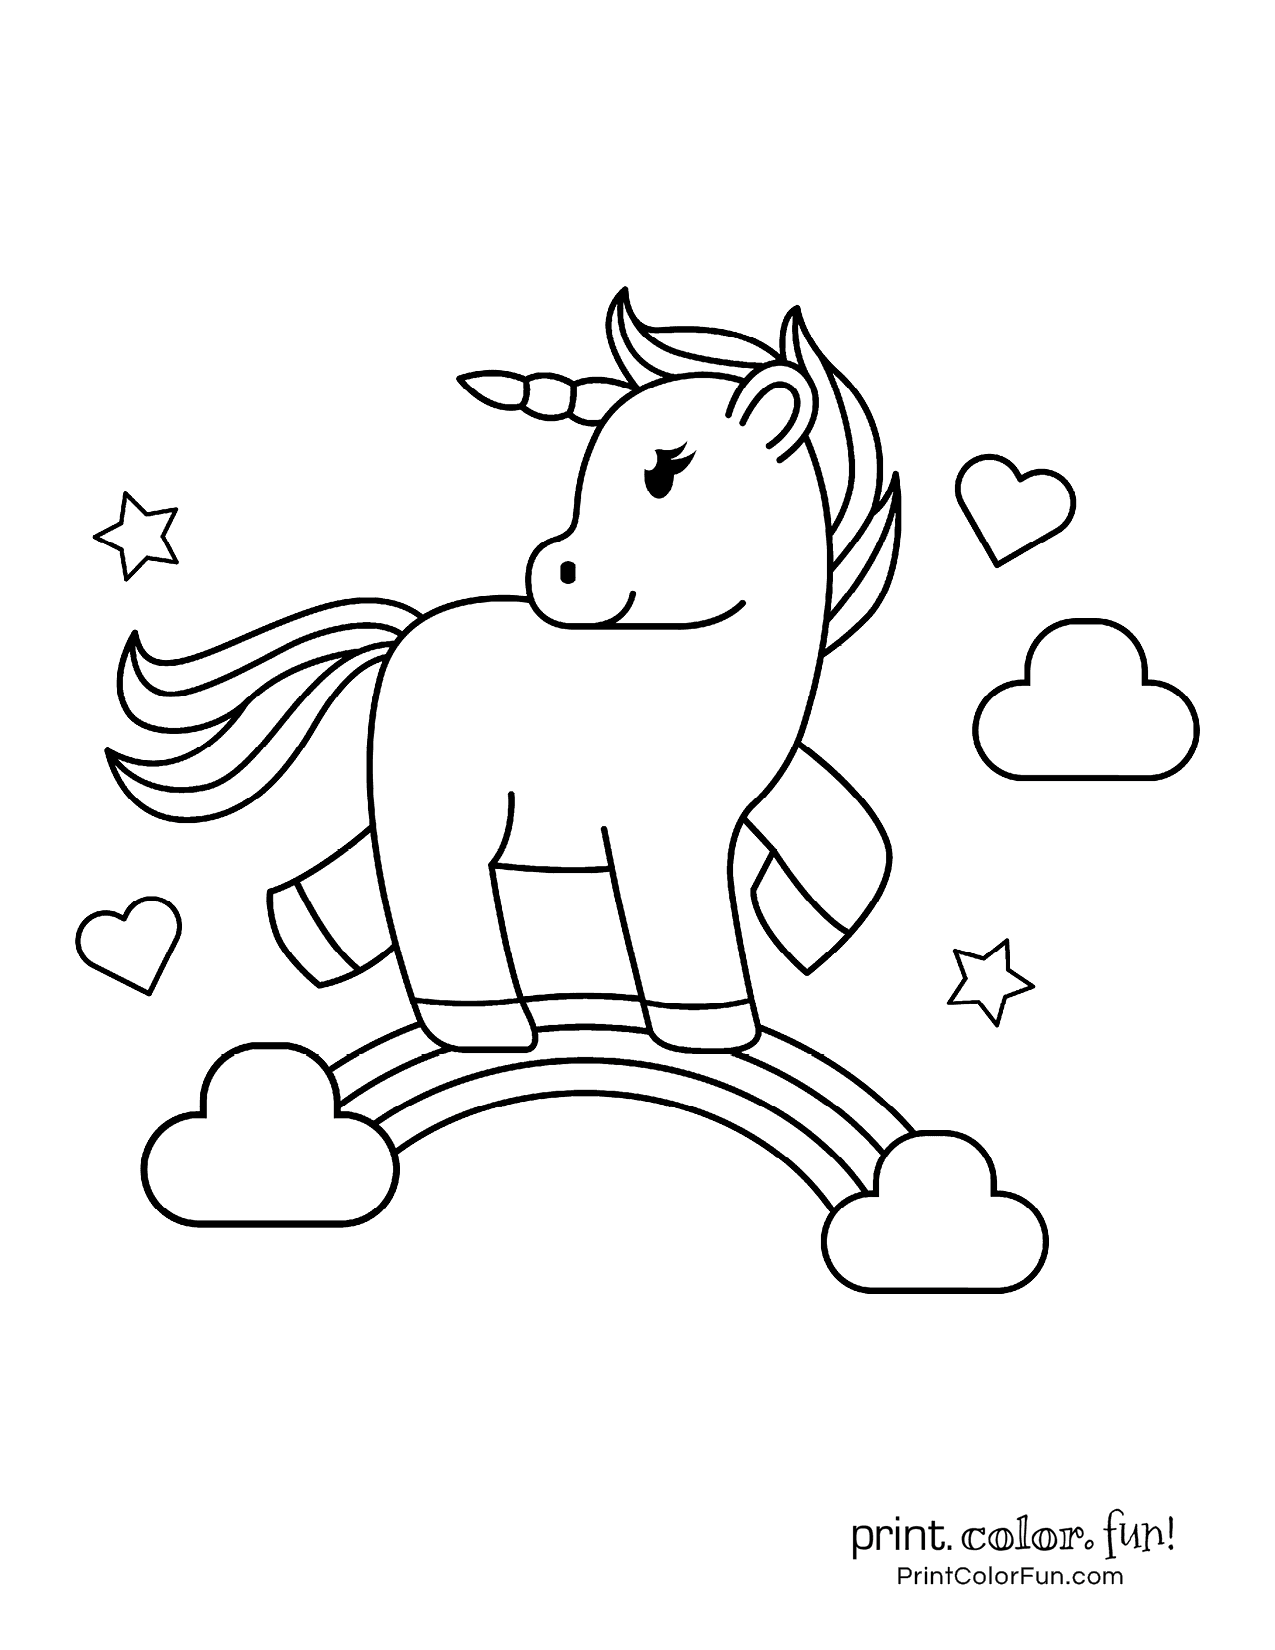 Cute My Little Unicorn 5 Different Coloring Pages To Print